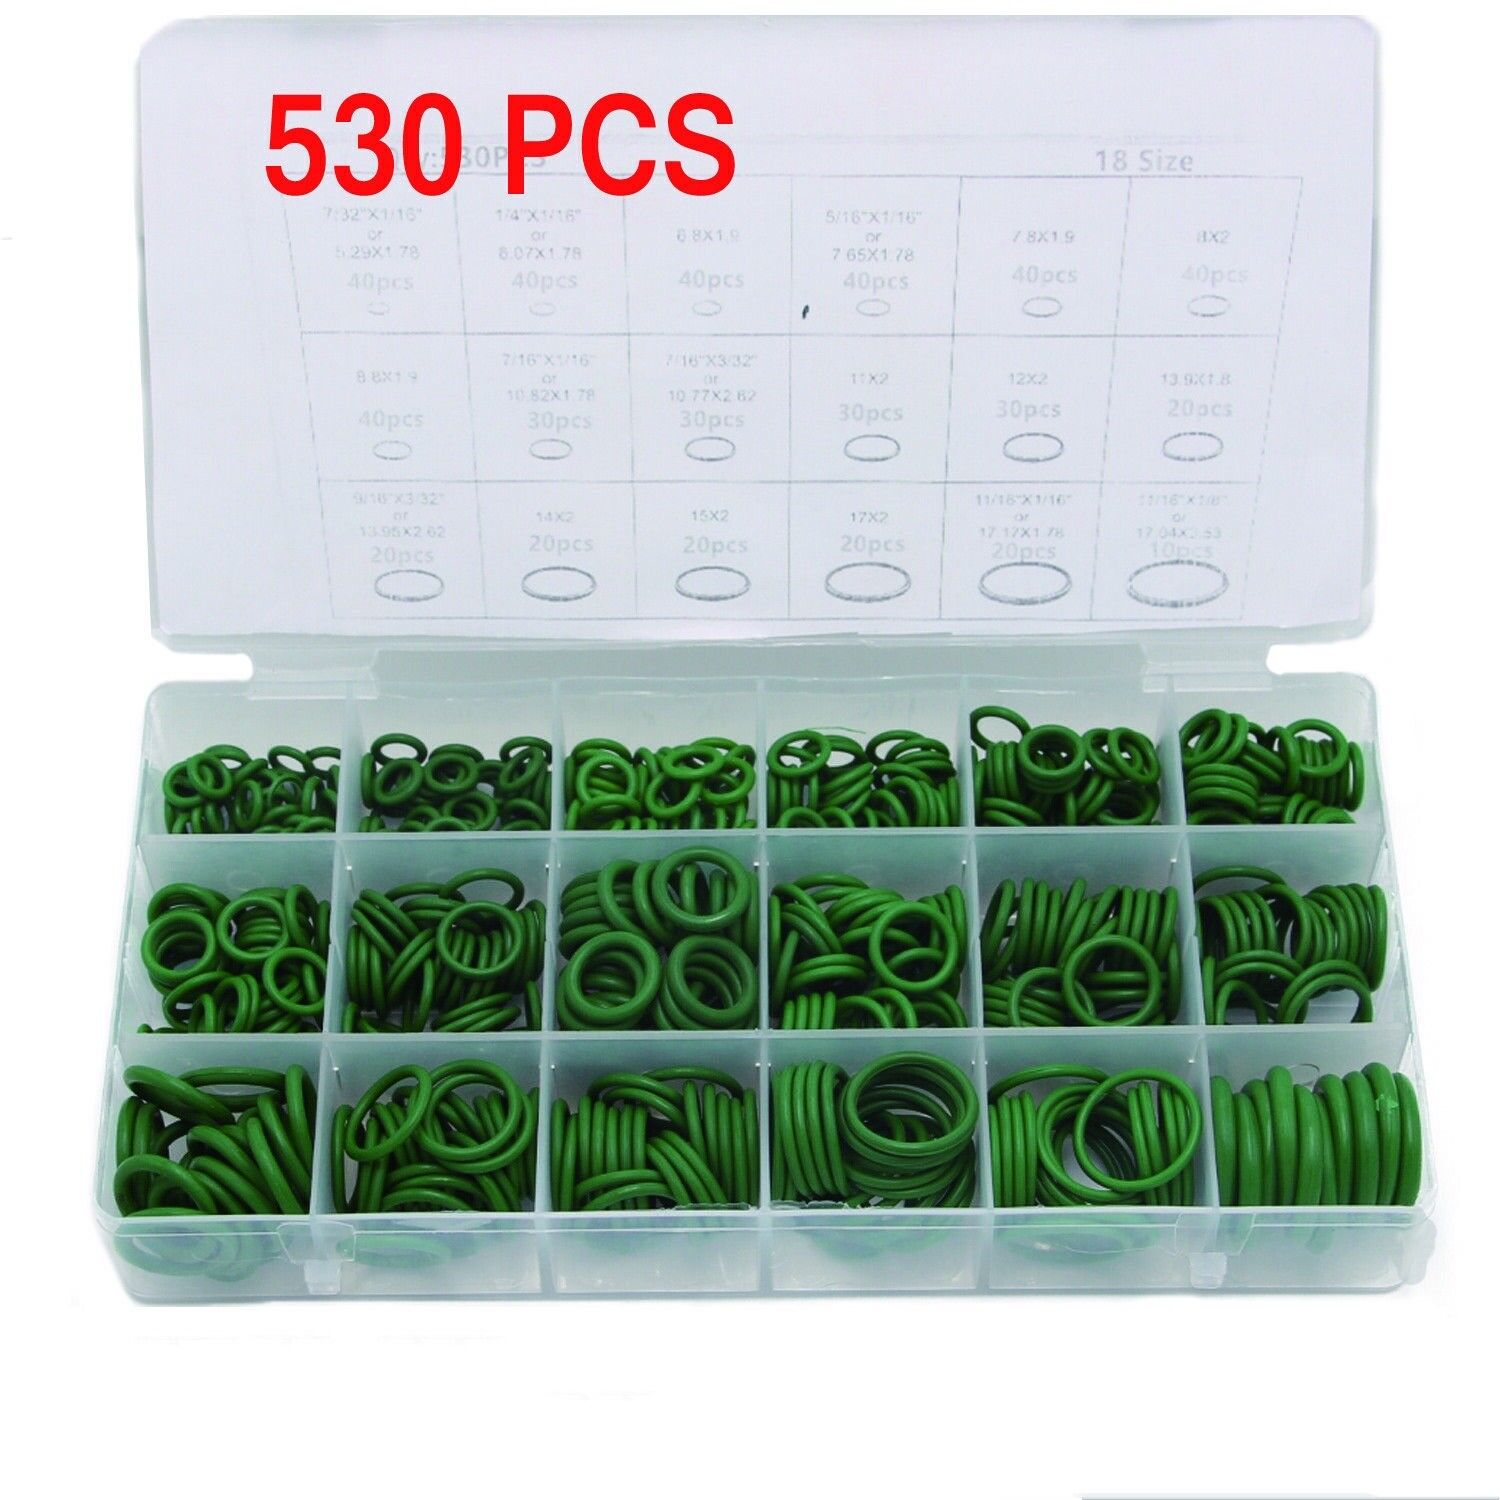 530PCS Green HNBR O-Rings Assortment Kit for A/C Compressor 18 Sizes US Stock